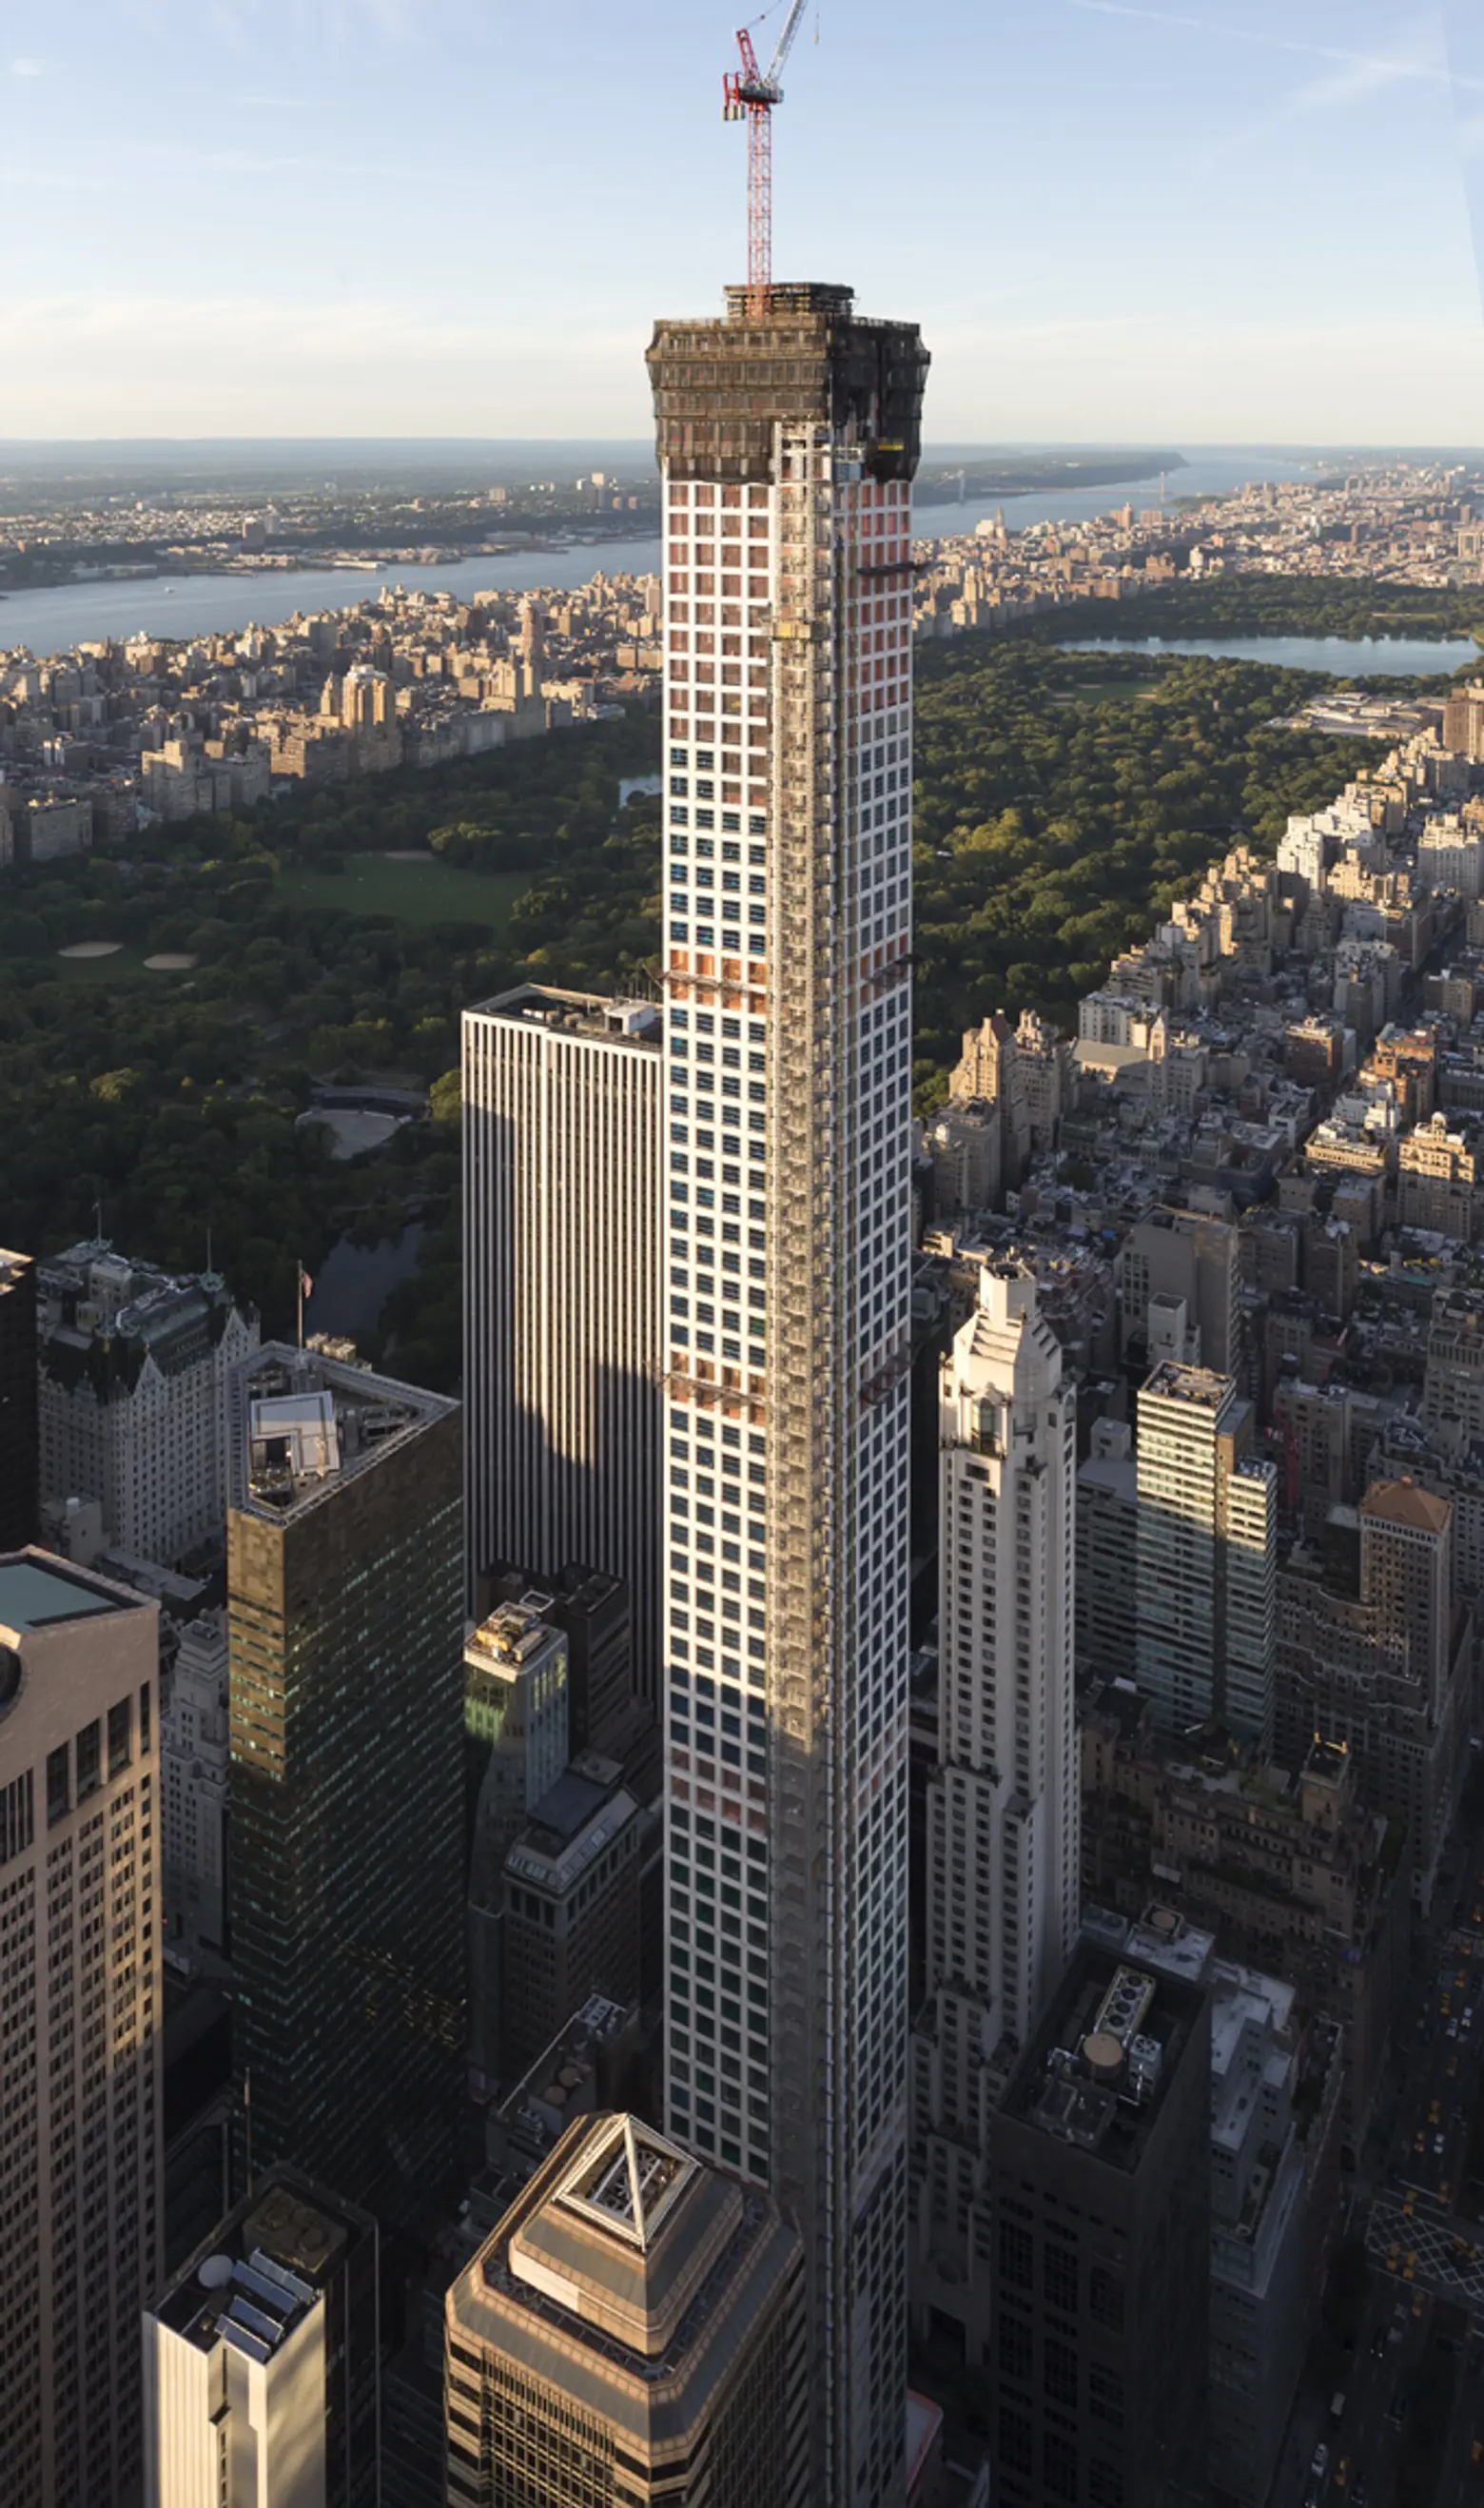 Rafael Viñoly’s 432 Park Reportedly Showing Cracks in Its 1,400-Foot Facade